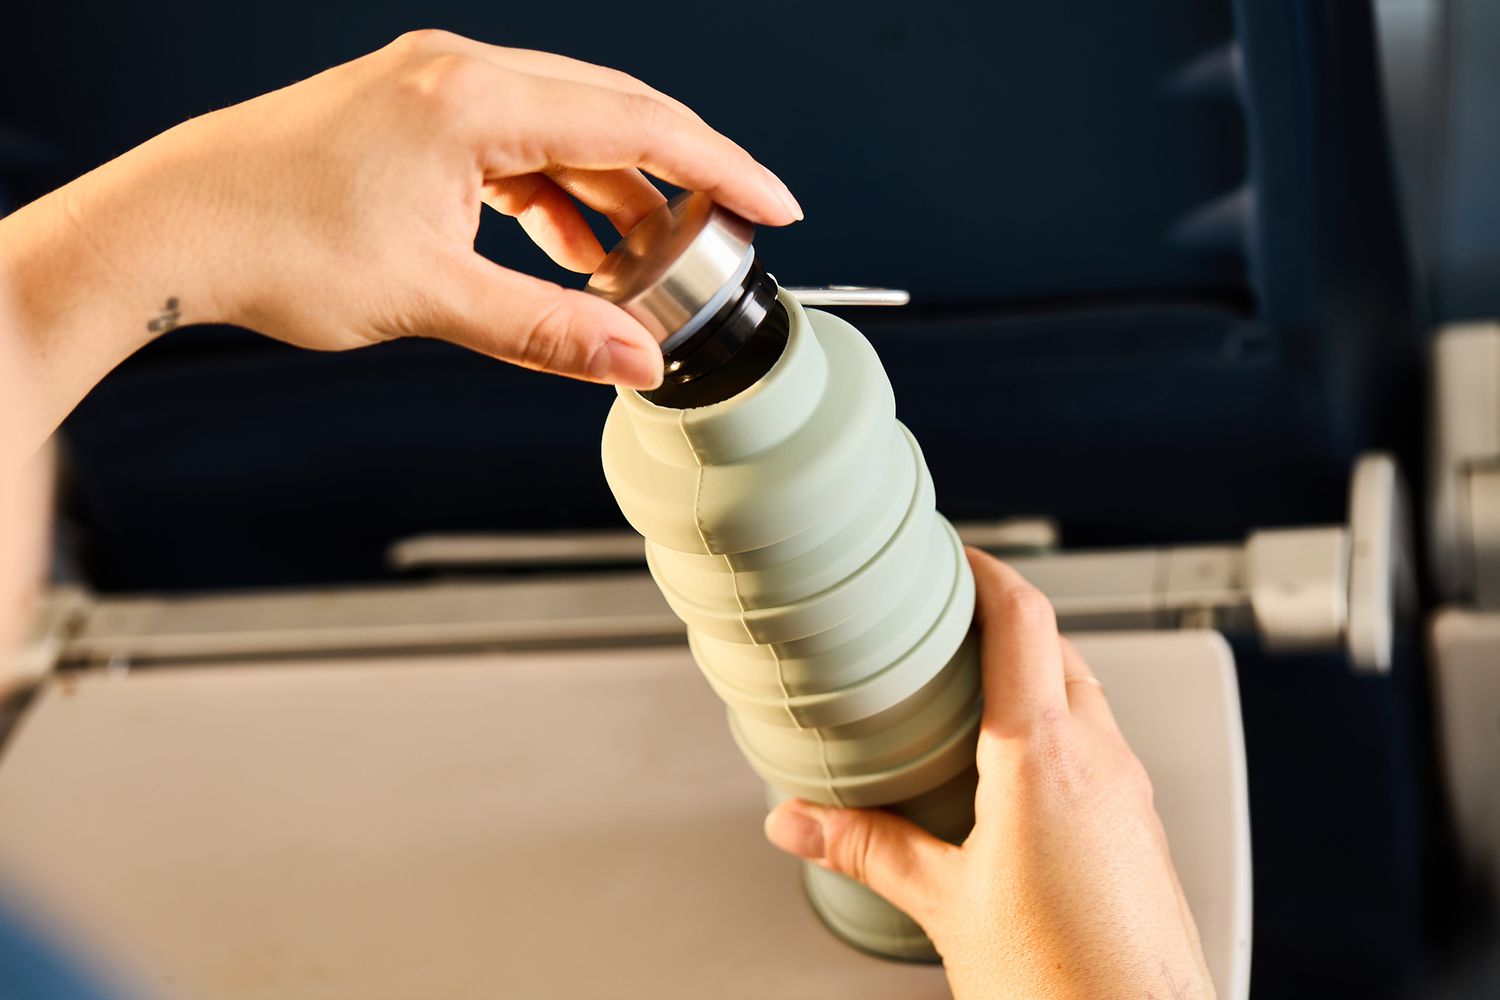 A re-usable water bottle